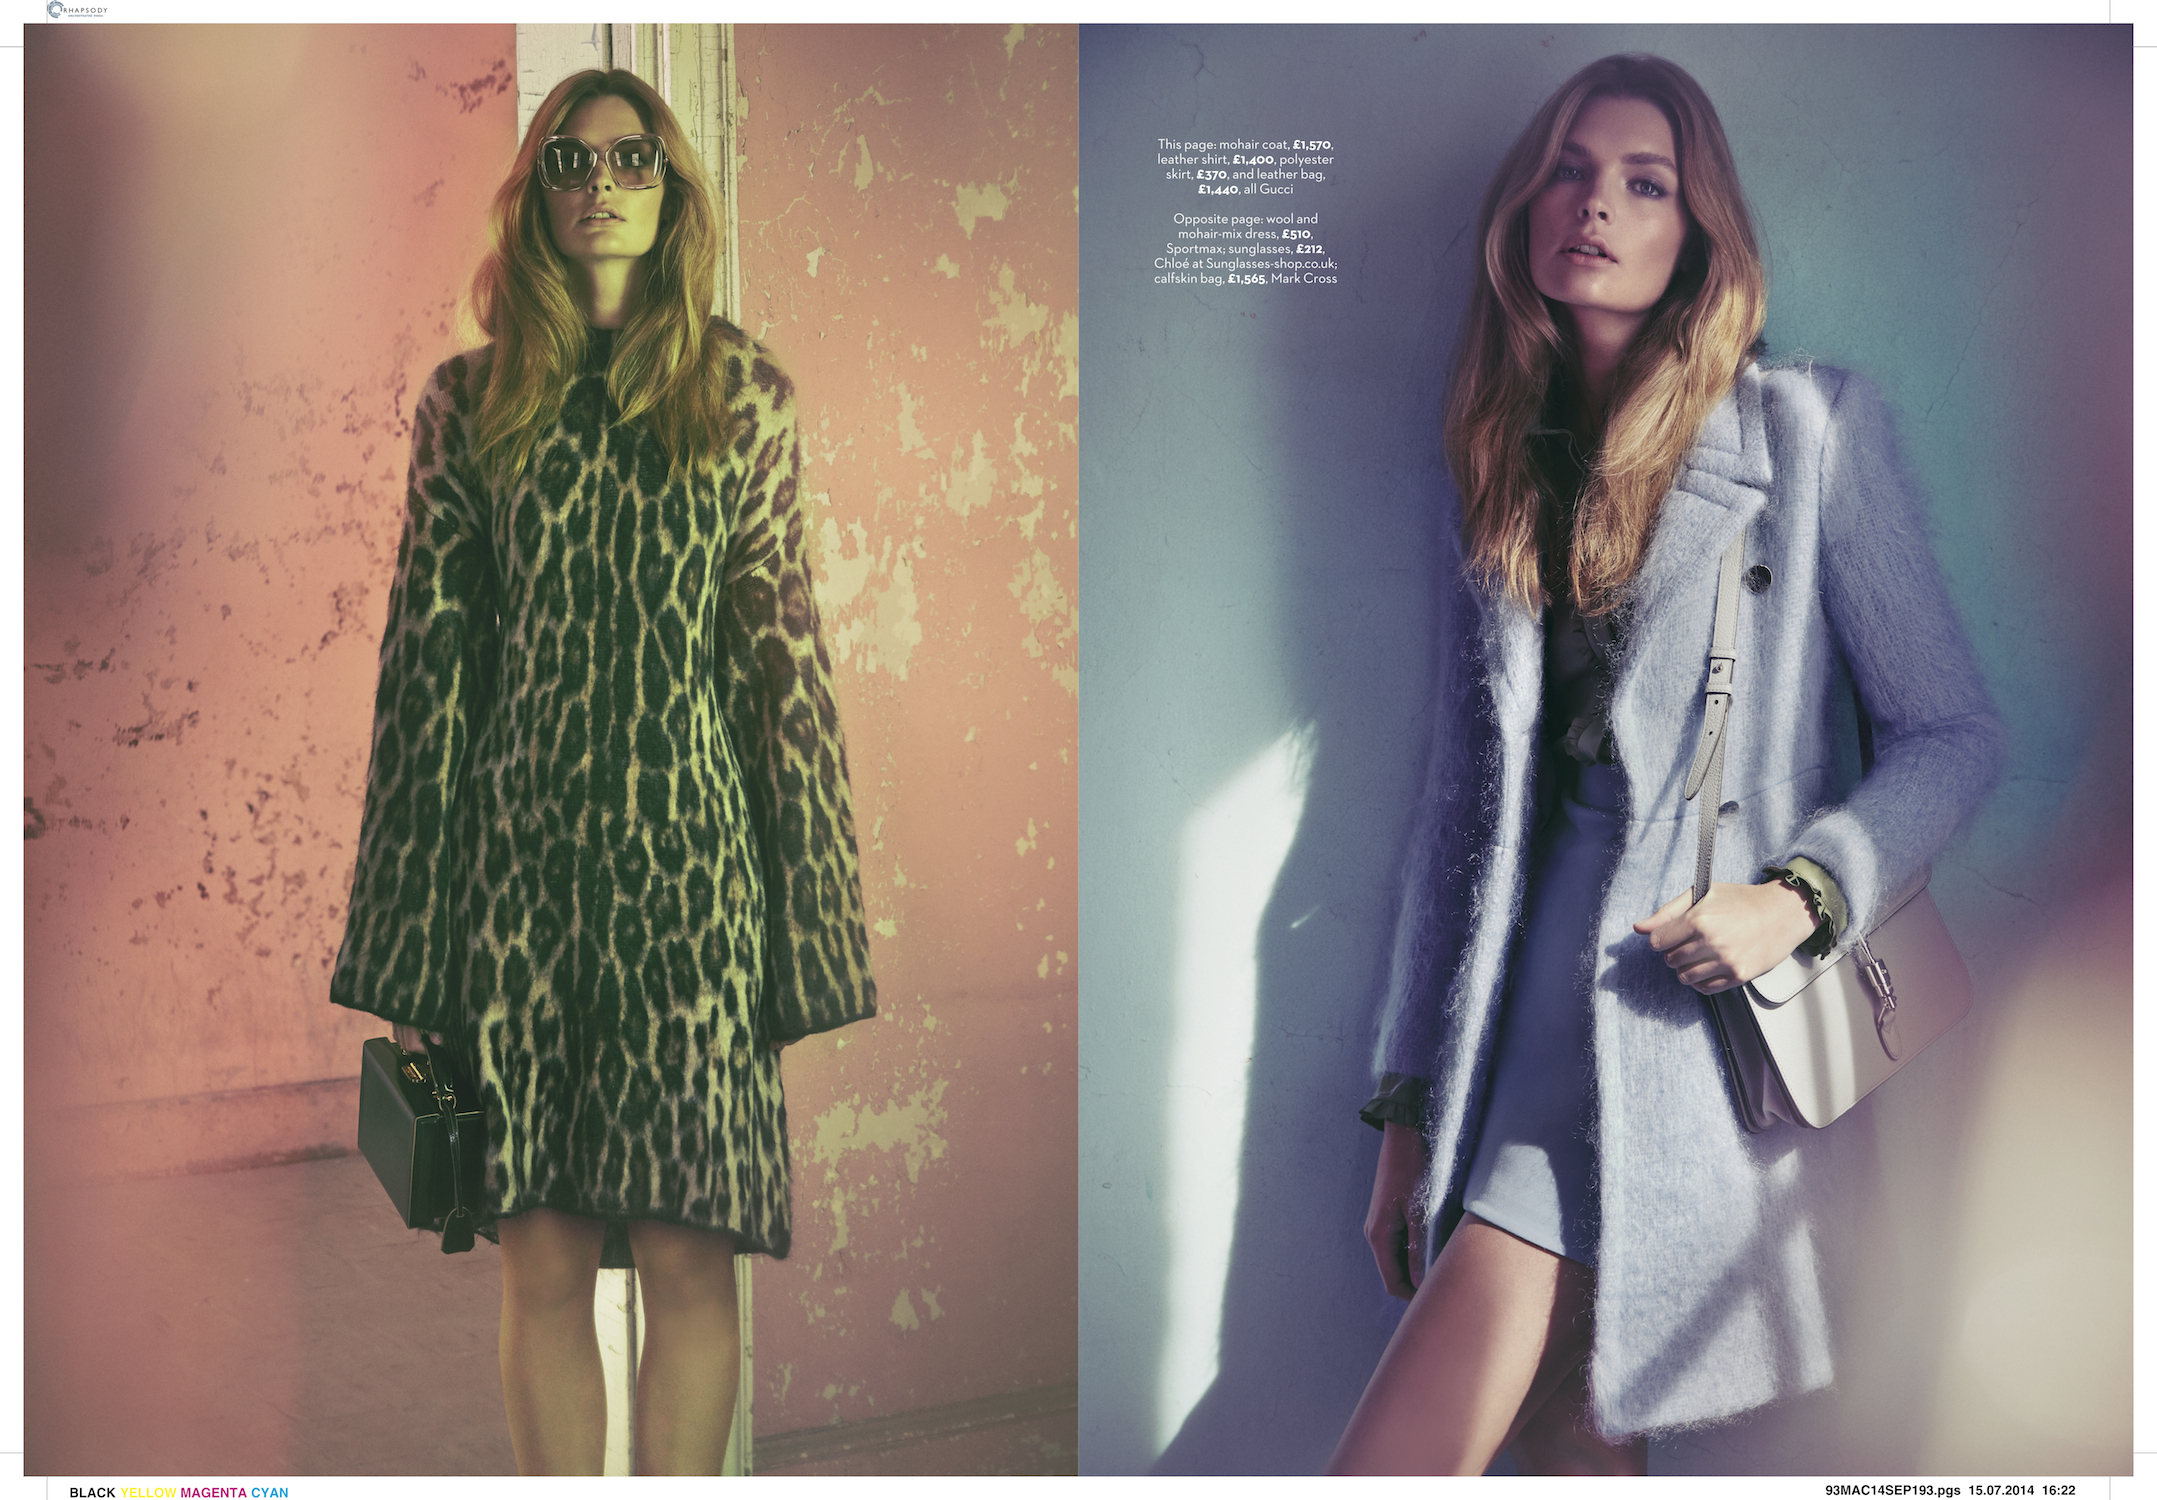 marie claire uk photo shoot of tiffany fraser steele by james macari 4